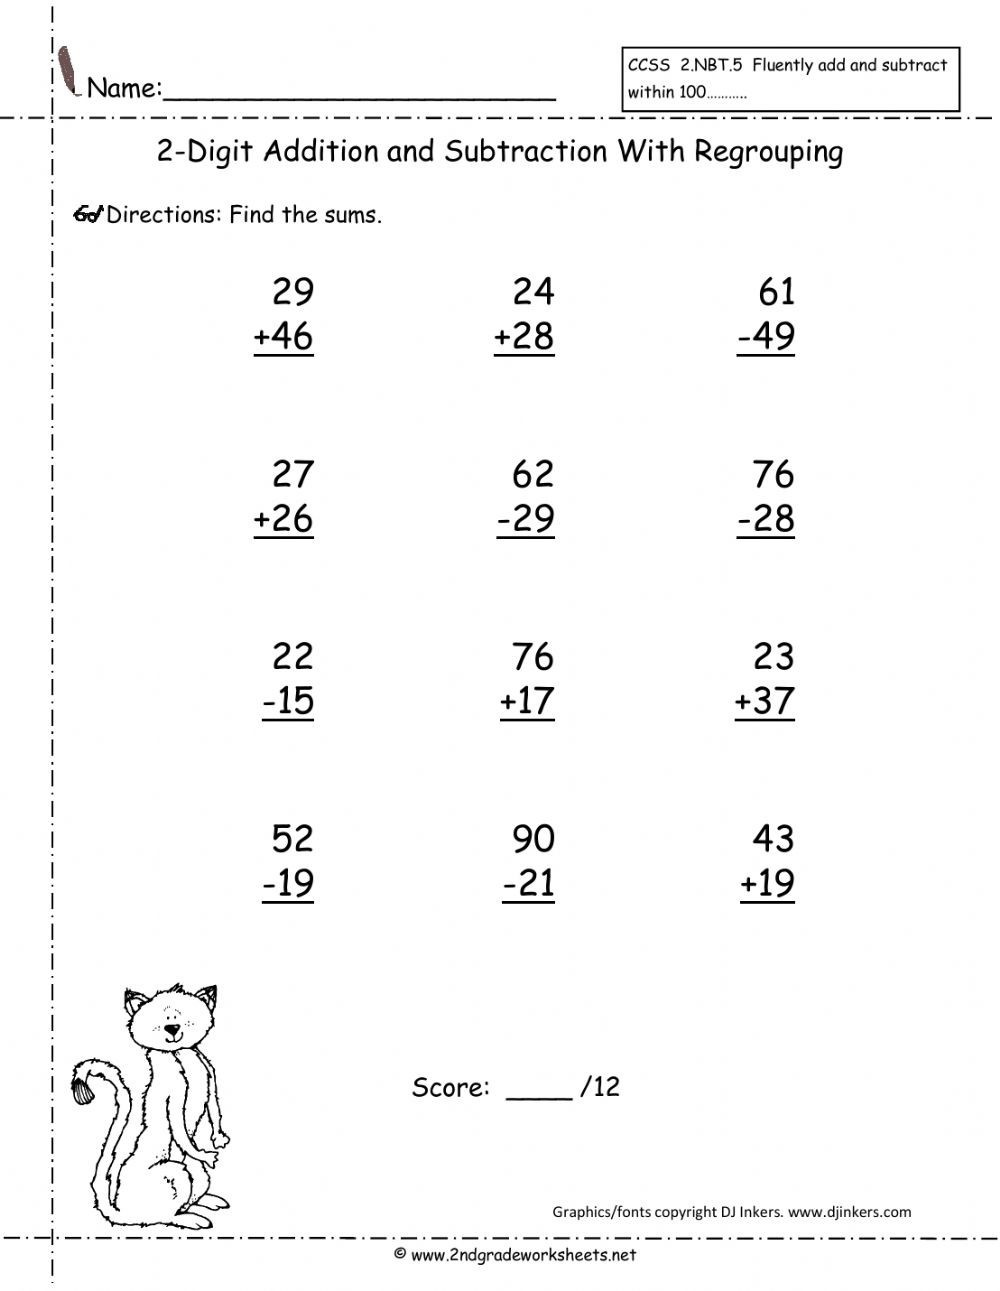 2-digit-addition-and-subtraction-with-regrouping-worksheets-worksheet-hero